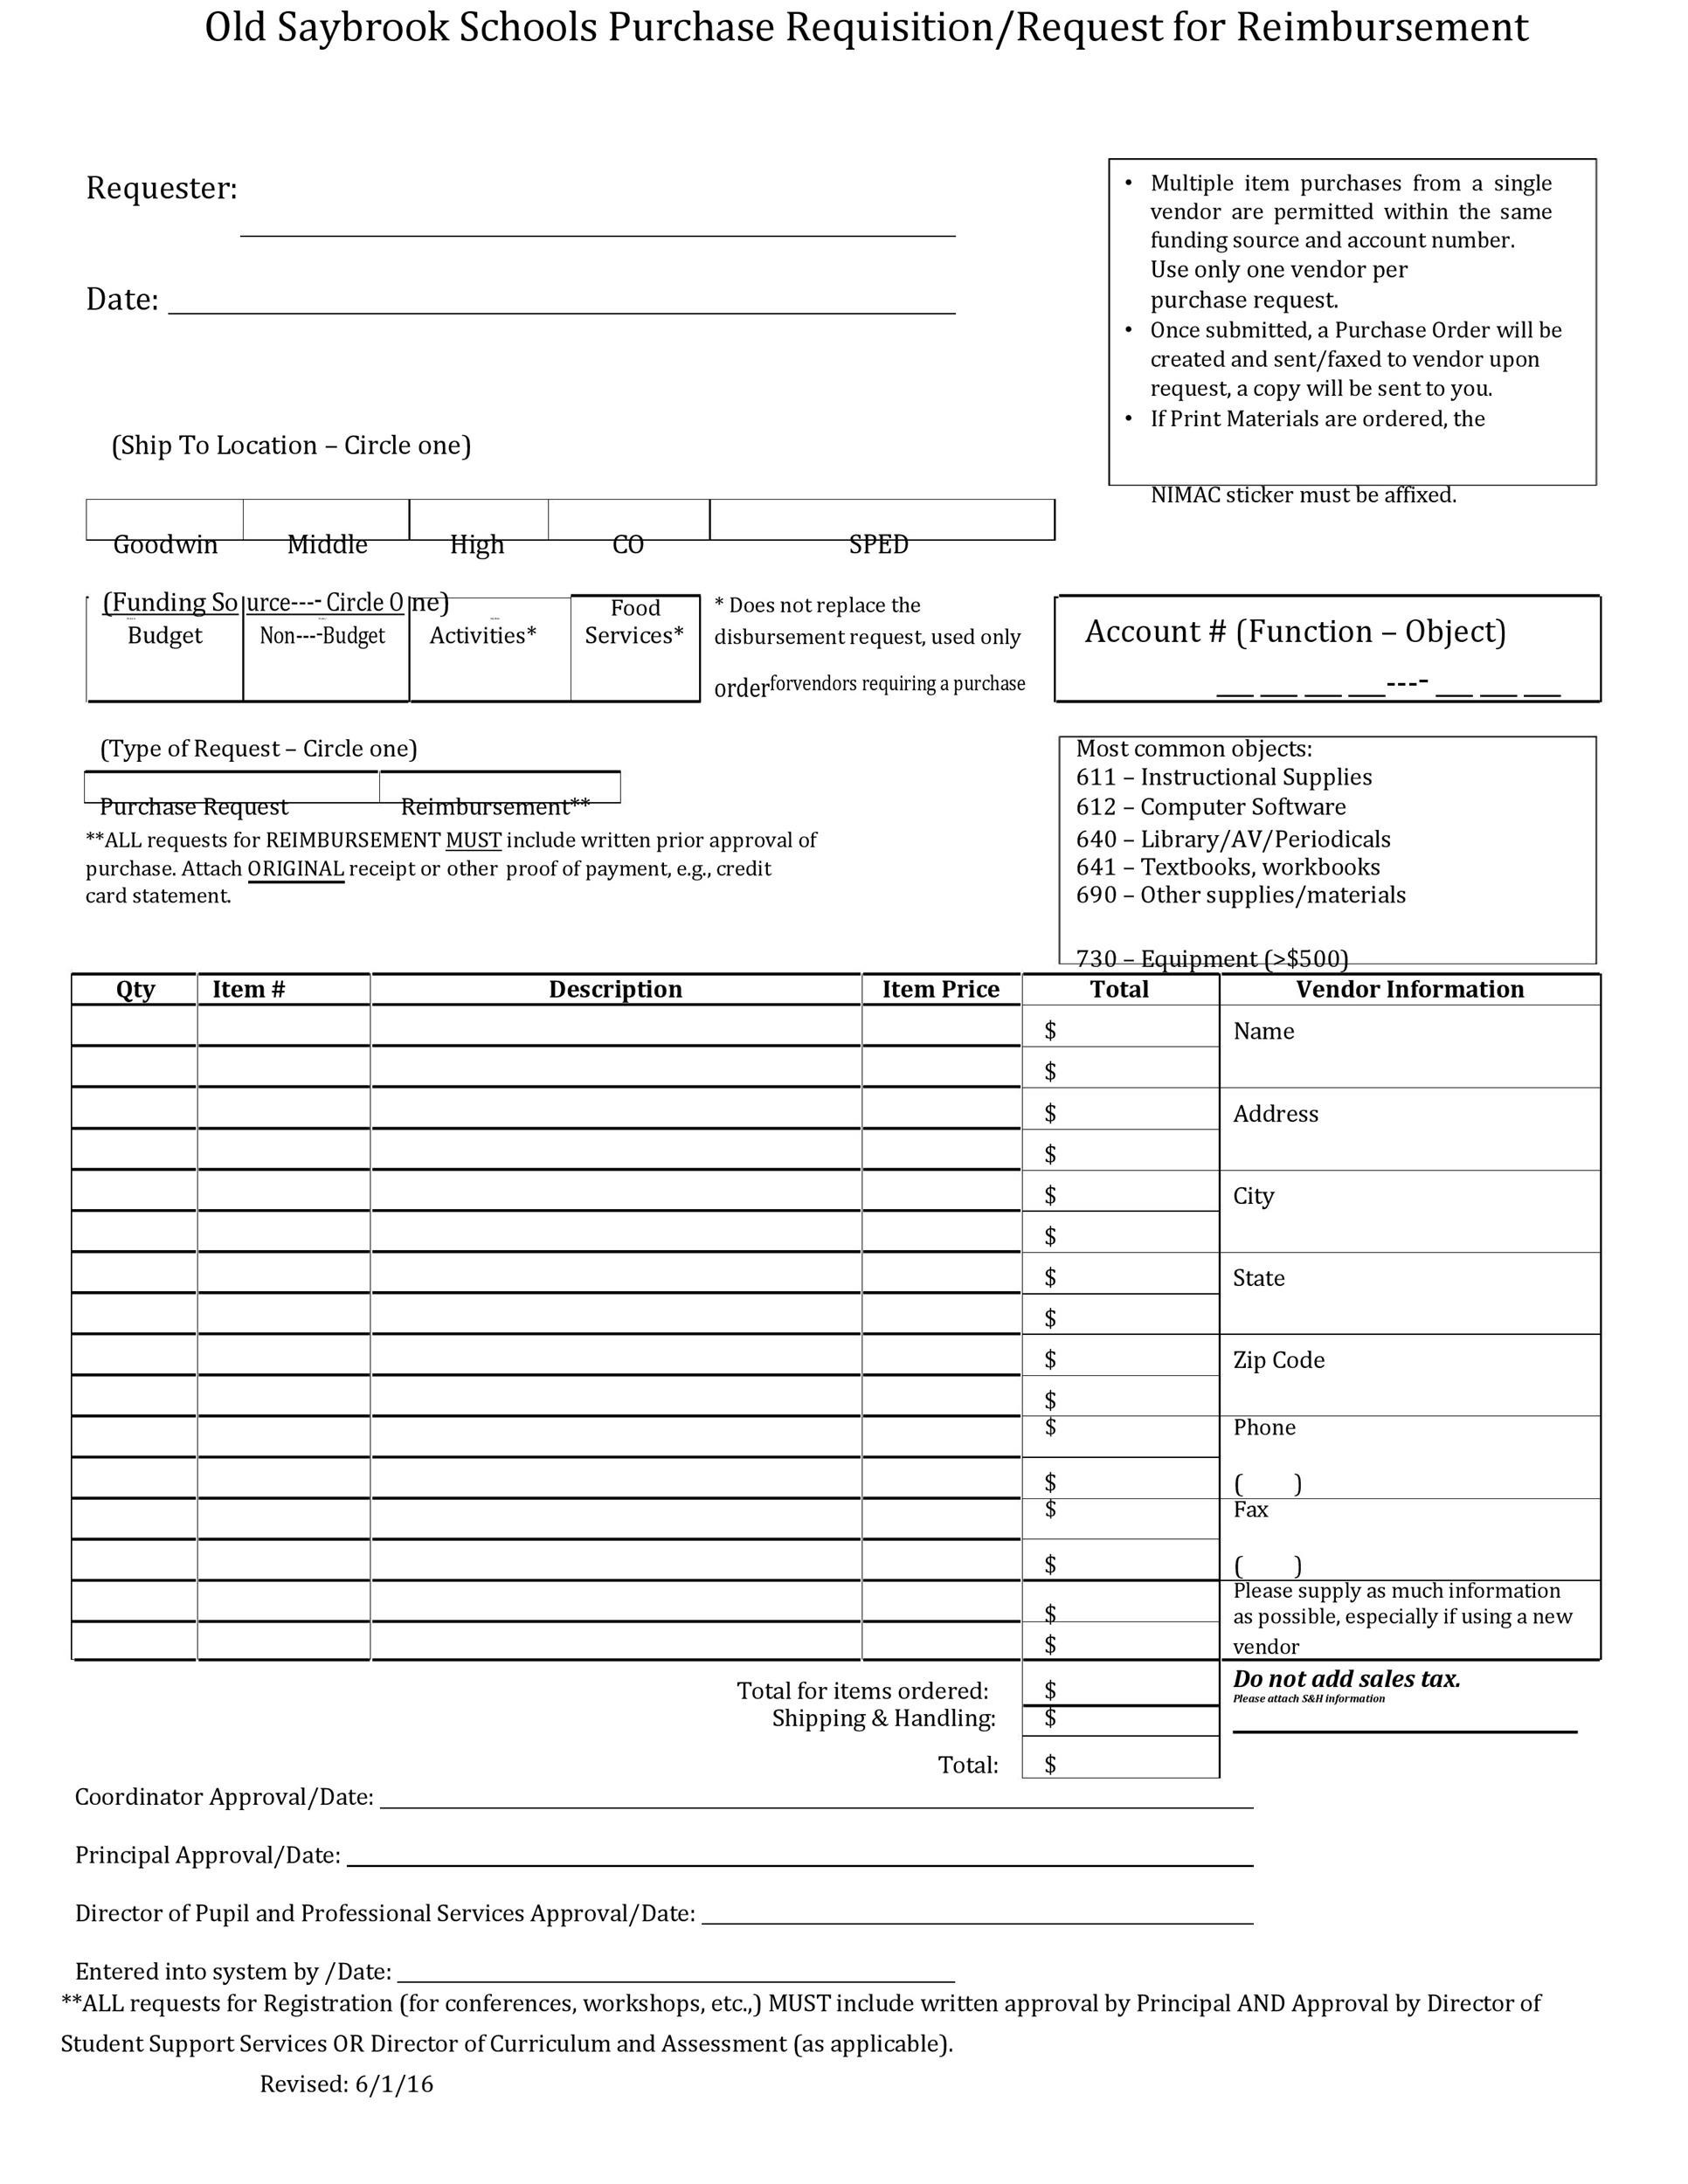 Free requisition form 25